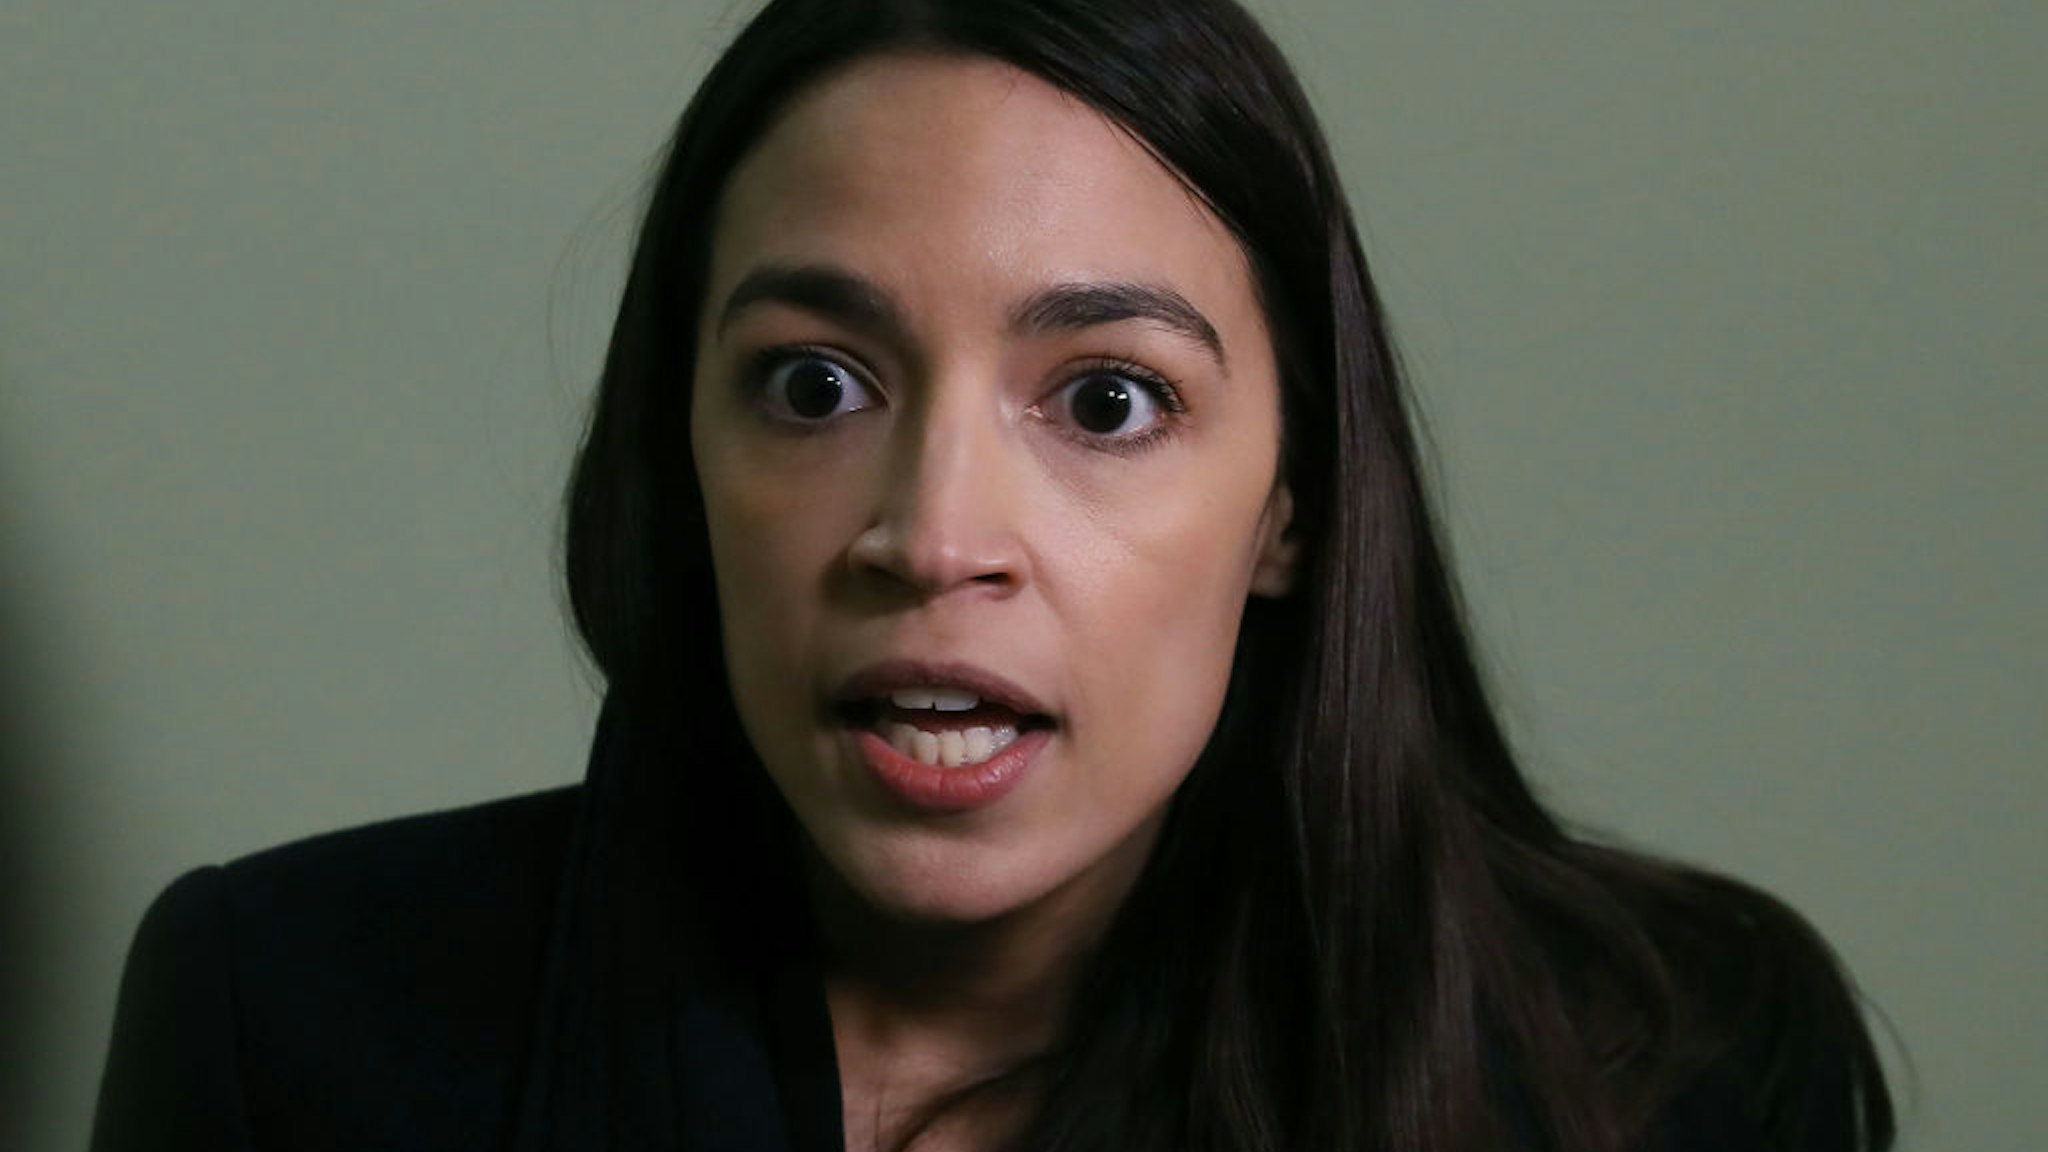 Alexandria Ocasio-Cortez speaks to the media about Amazon scrapping its plans to build a new headquarters